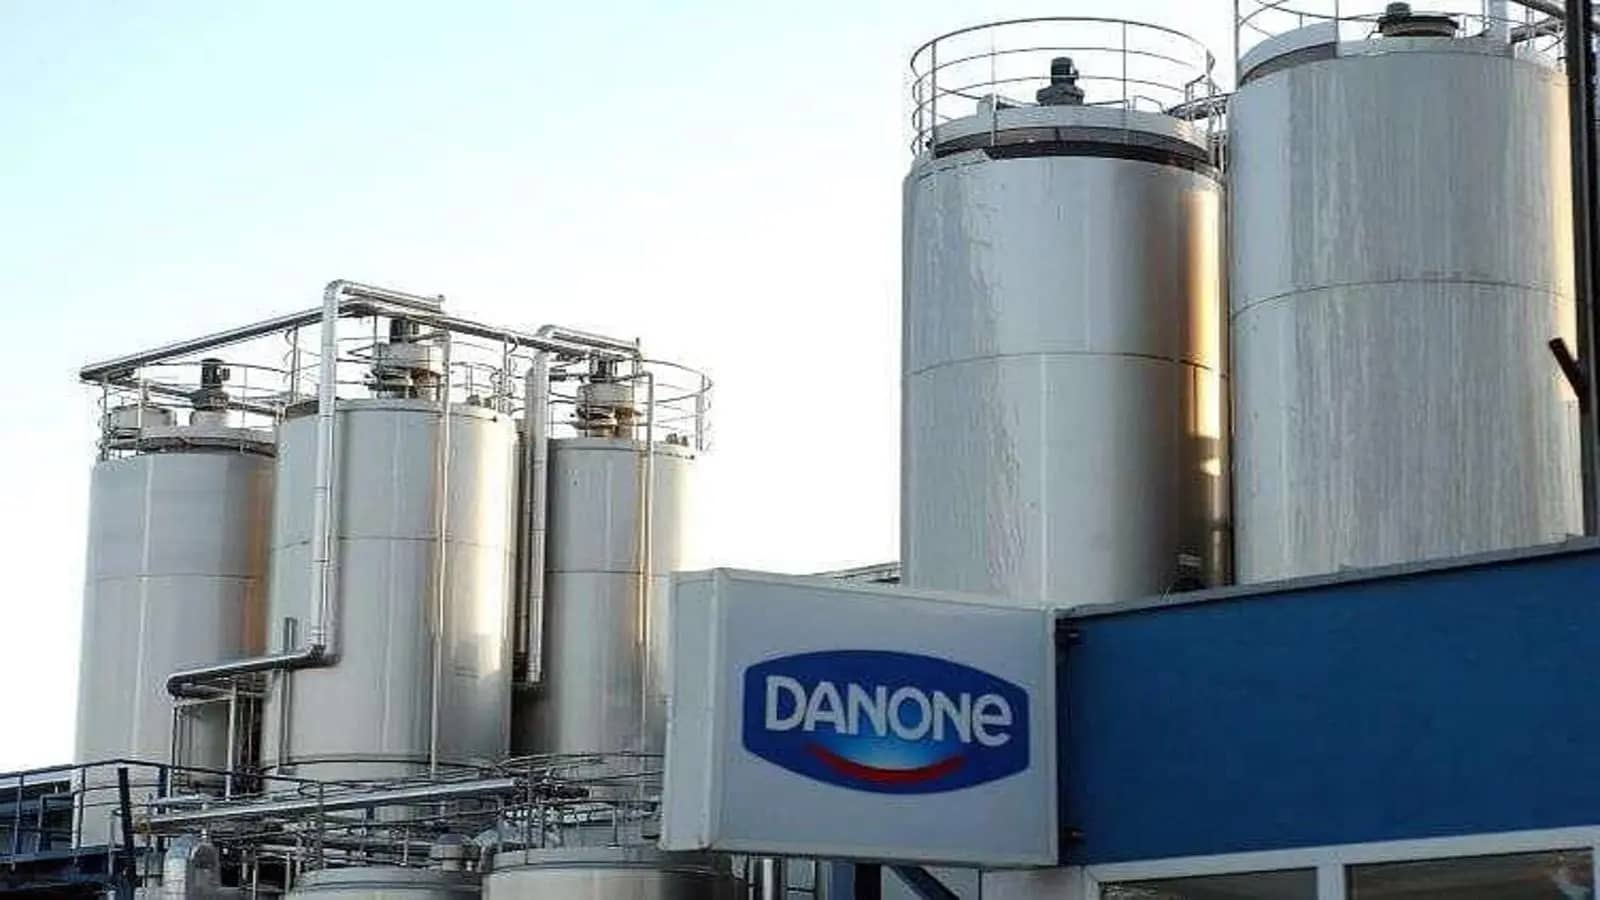 Danone posts strong first half results boosted by higher prices